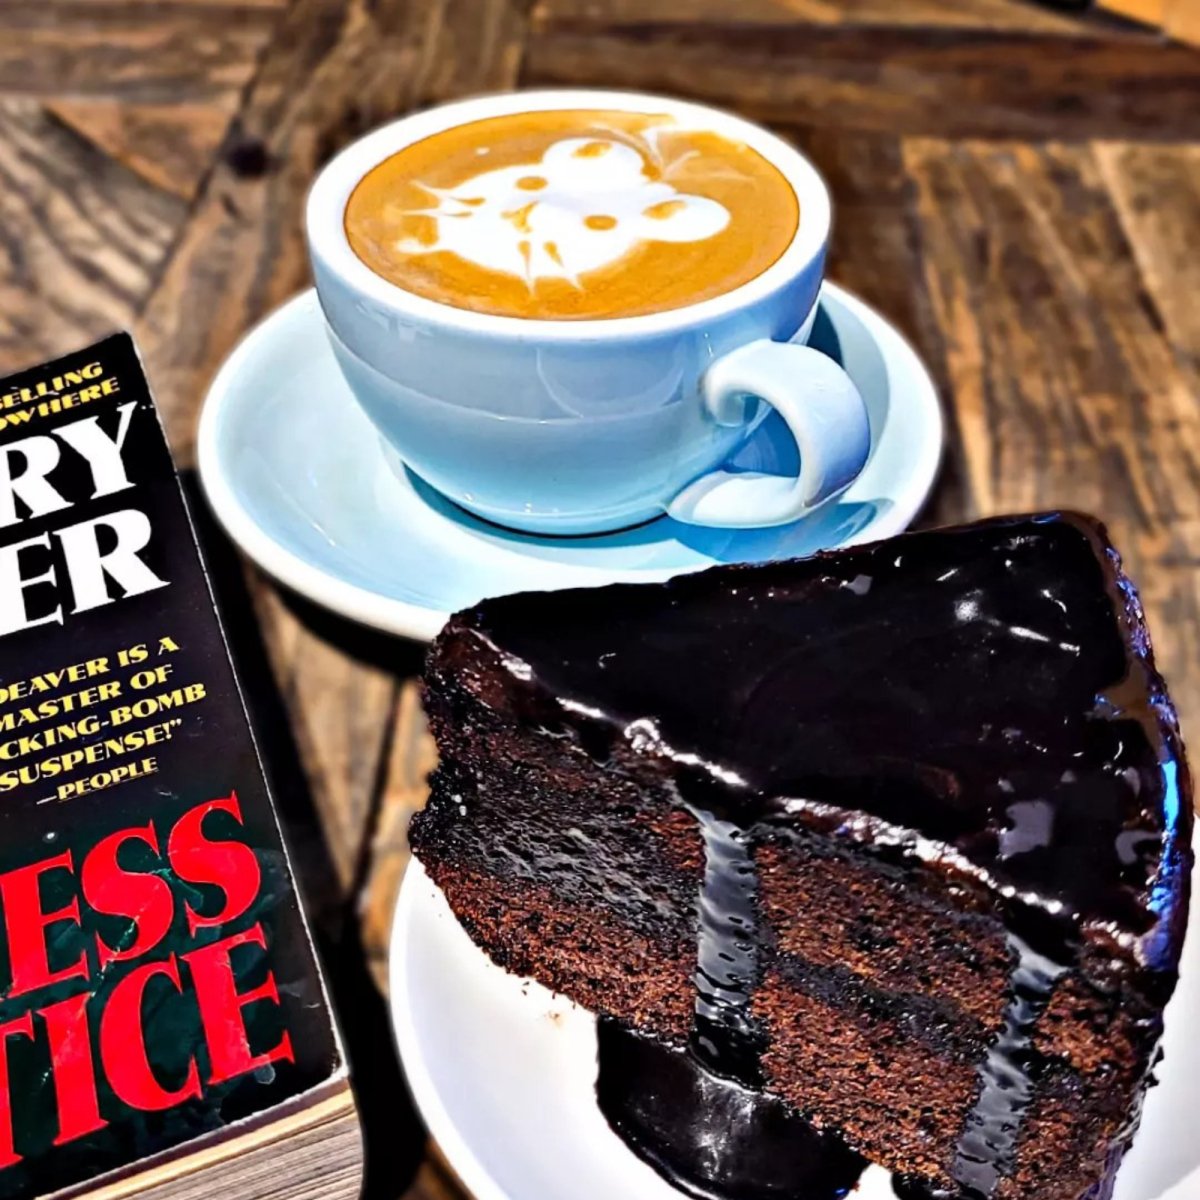 1x Delicious Cake Slice + 1x Freshly Brewed Hot or Cold Coffee of your choice - Pages & Coffee, Colombo - 06 | Feelo